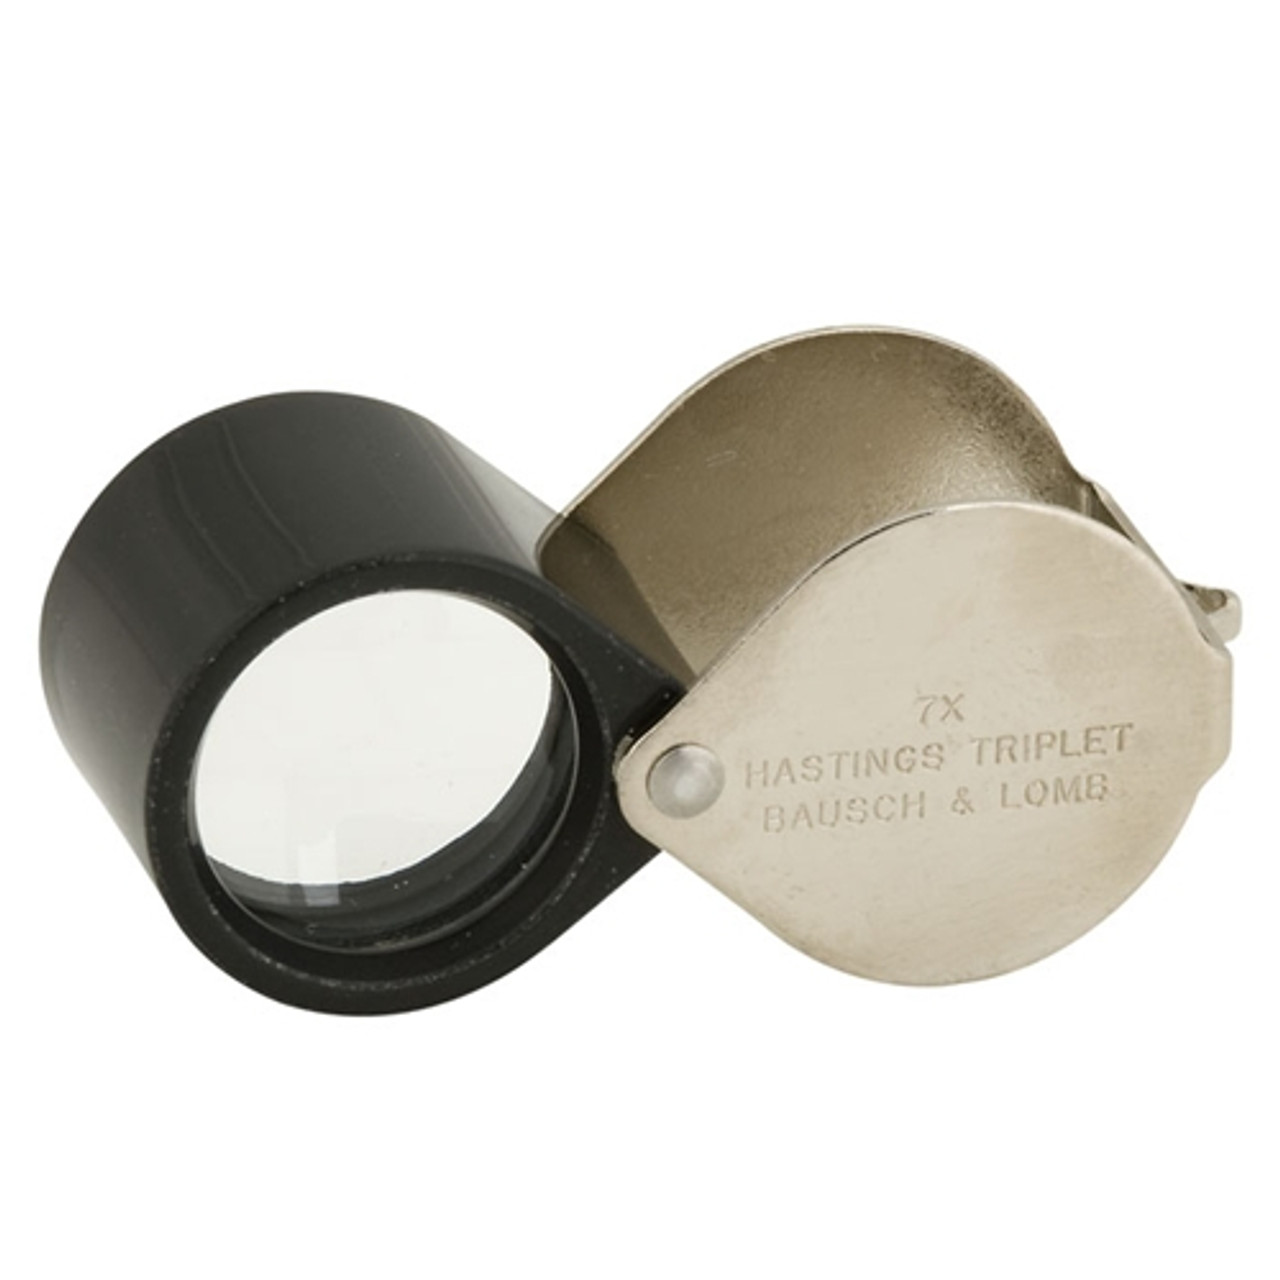 Bausch & Lomb® Hastings Triplet  Loupe Lens - 10X